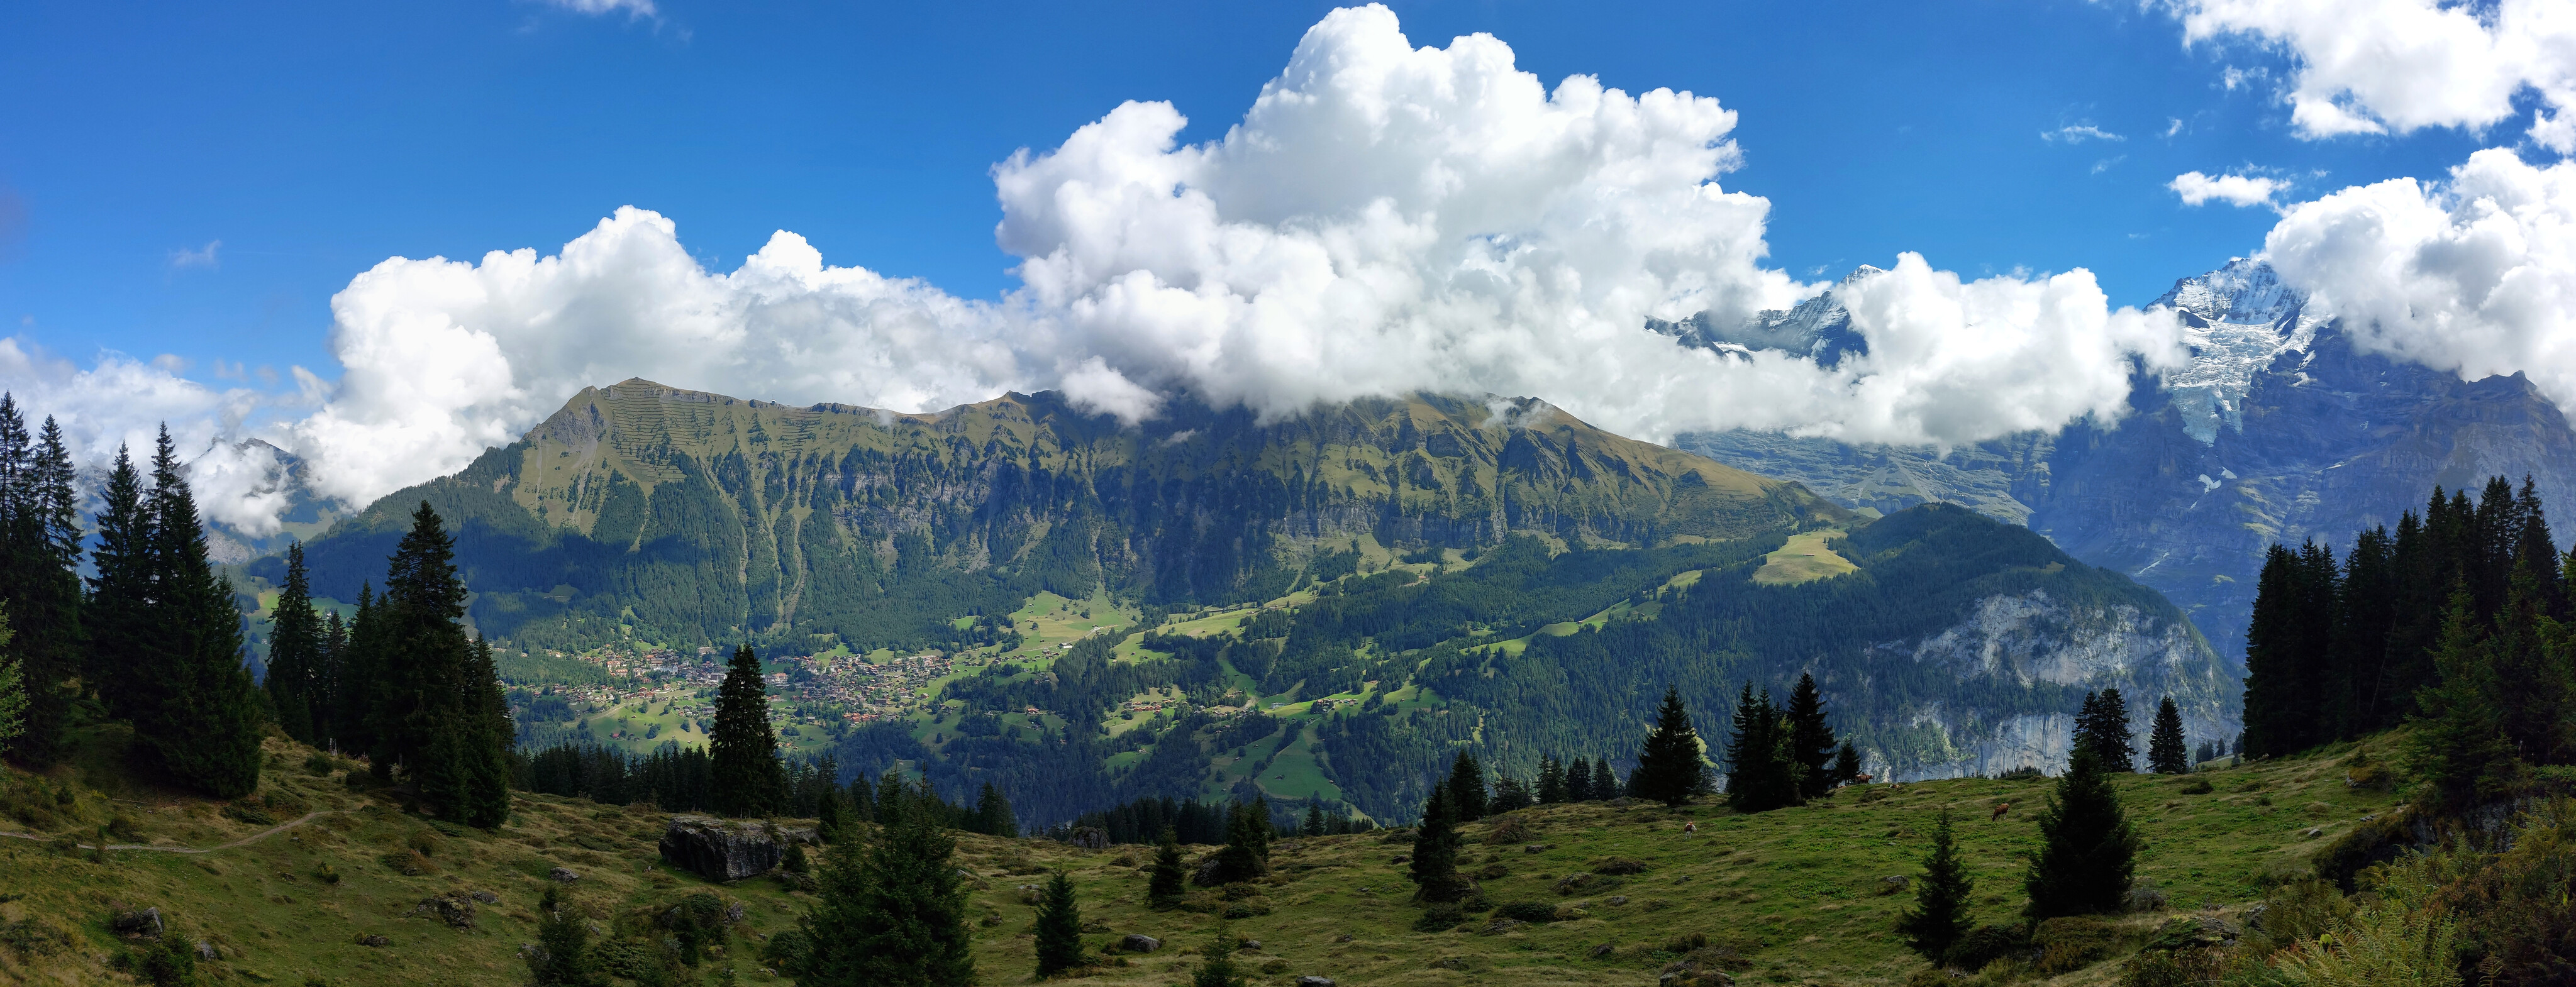 Panorama from Mountain View Trail looking at Wengen, the Jungfrai, and the Mönch